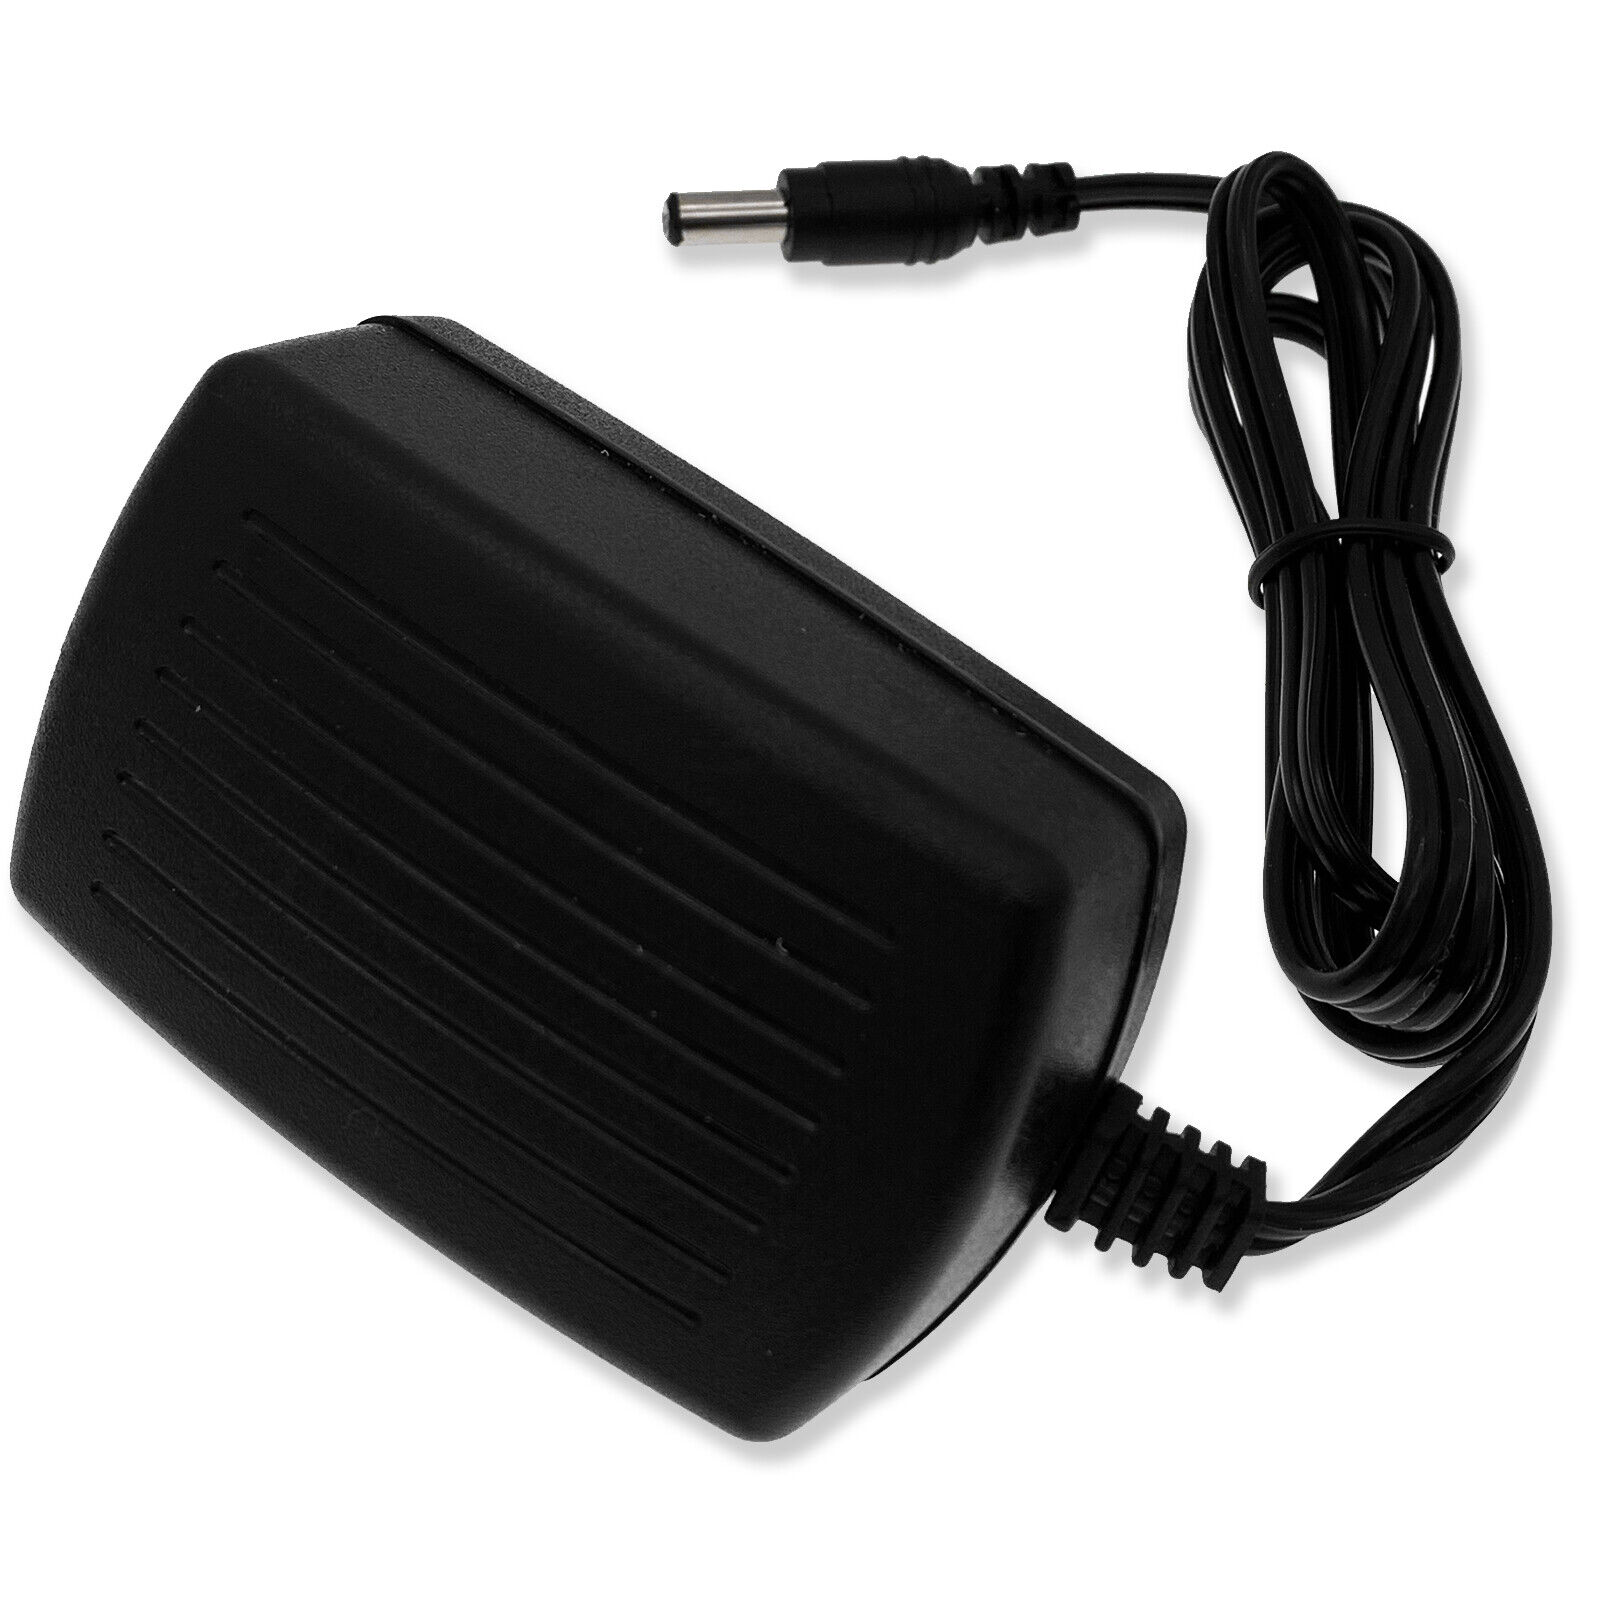 For Microsoft Surface Pro 4 3 Tablet Power Supply 1625 Adapter 12V 2.58A Charger Color Black UPC Does not apply Output